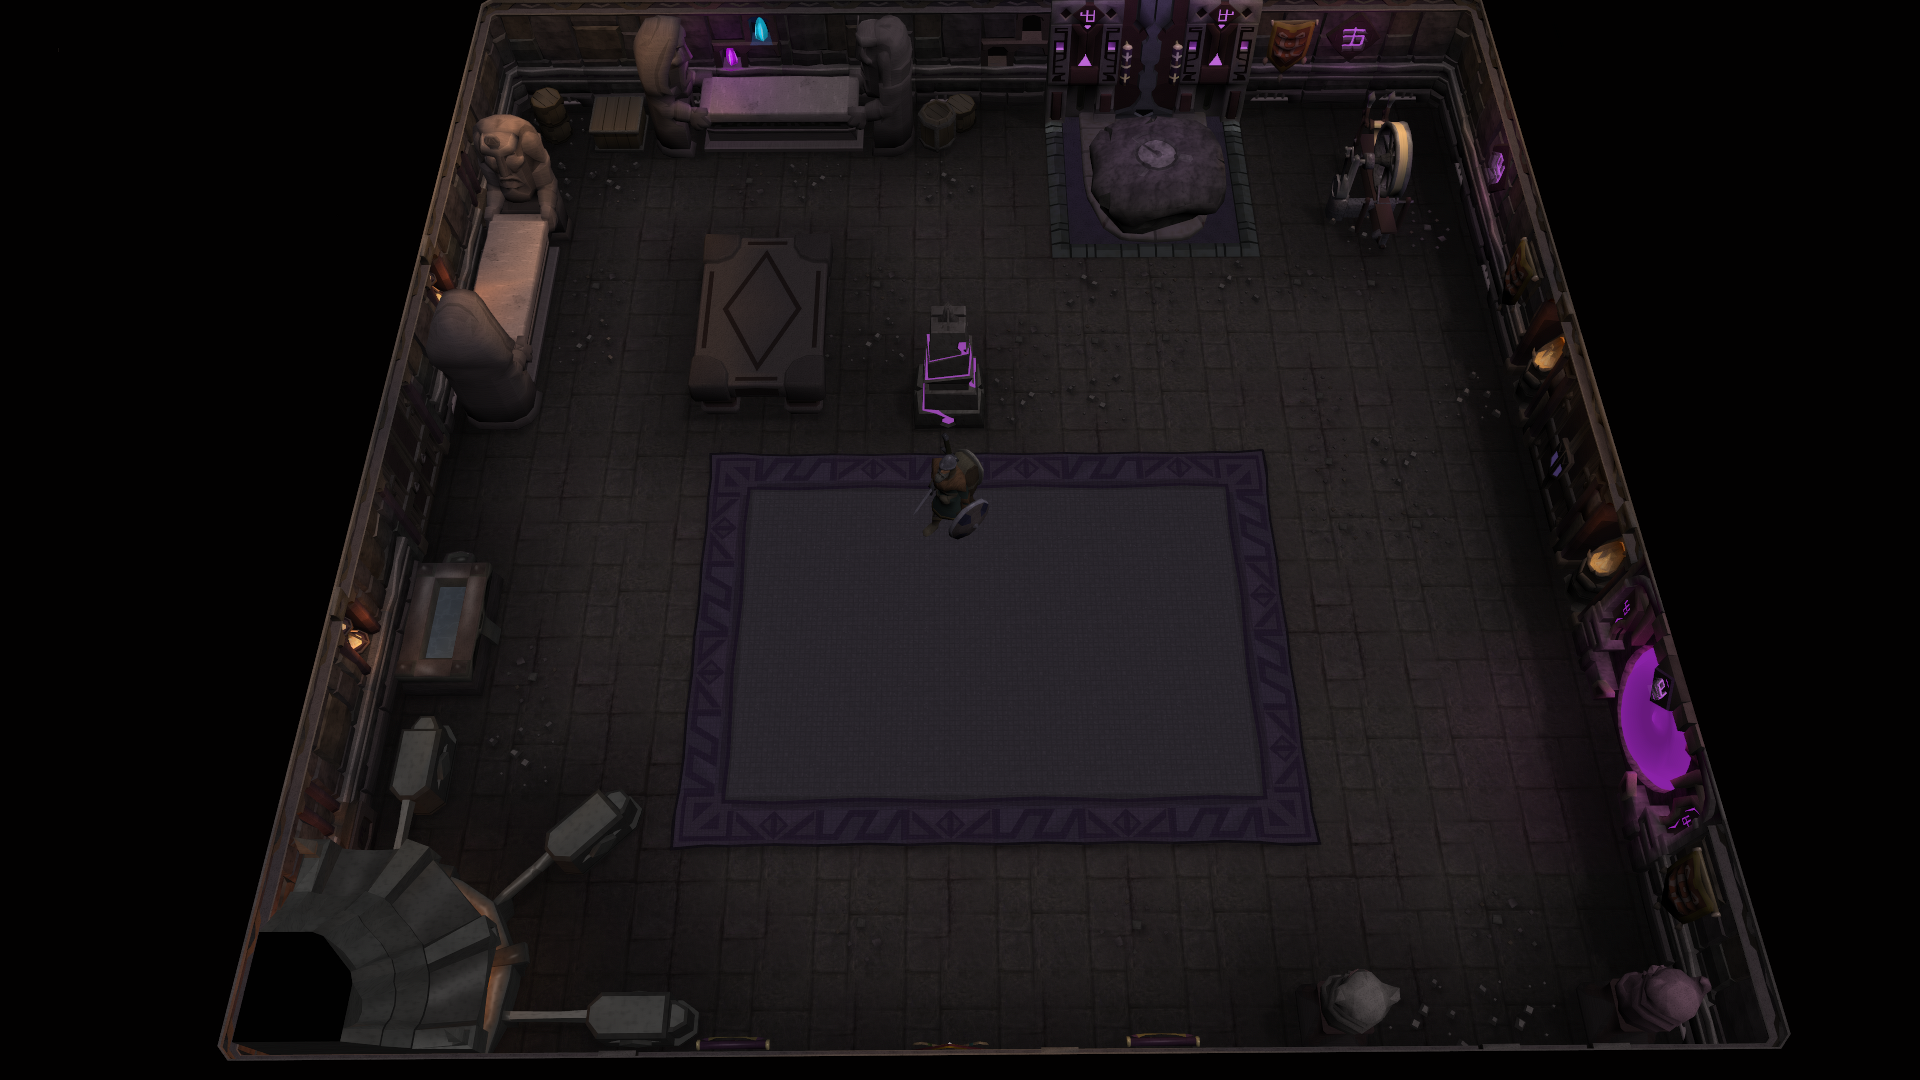 Dungeoneering party simulator - The RuneScape Wiki